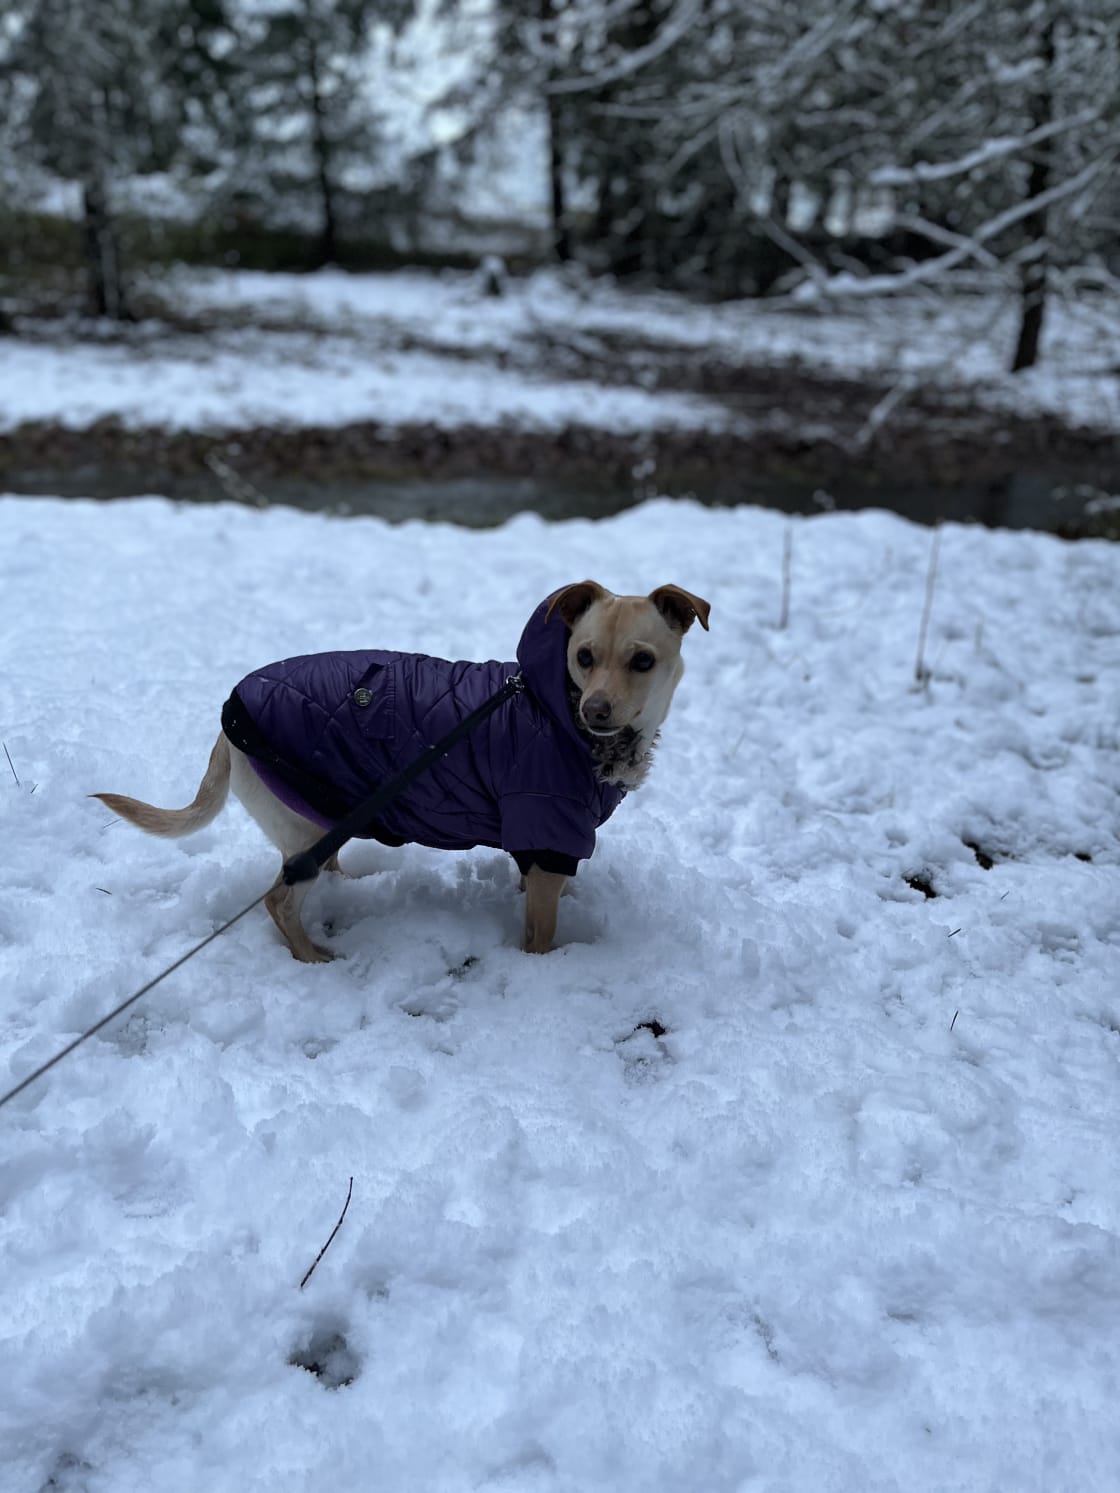 Our sweet Chiweenie had fun in the snow!